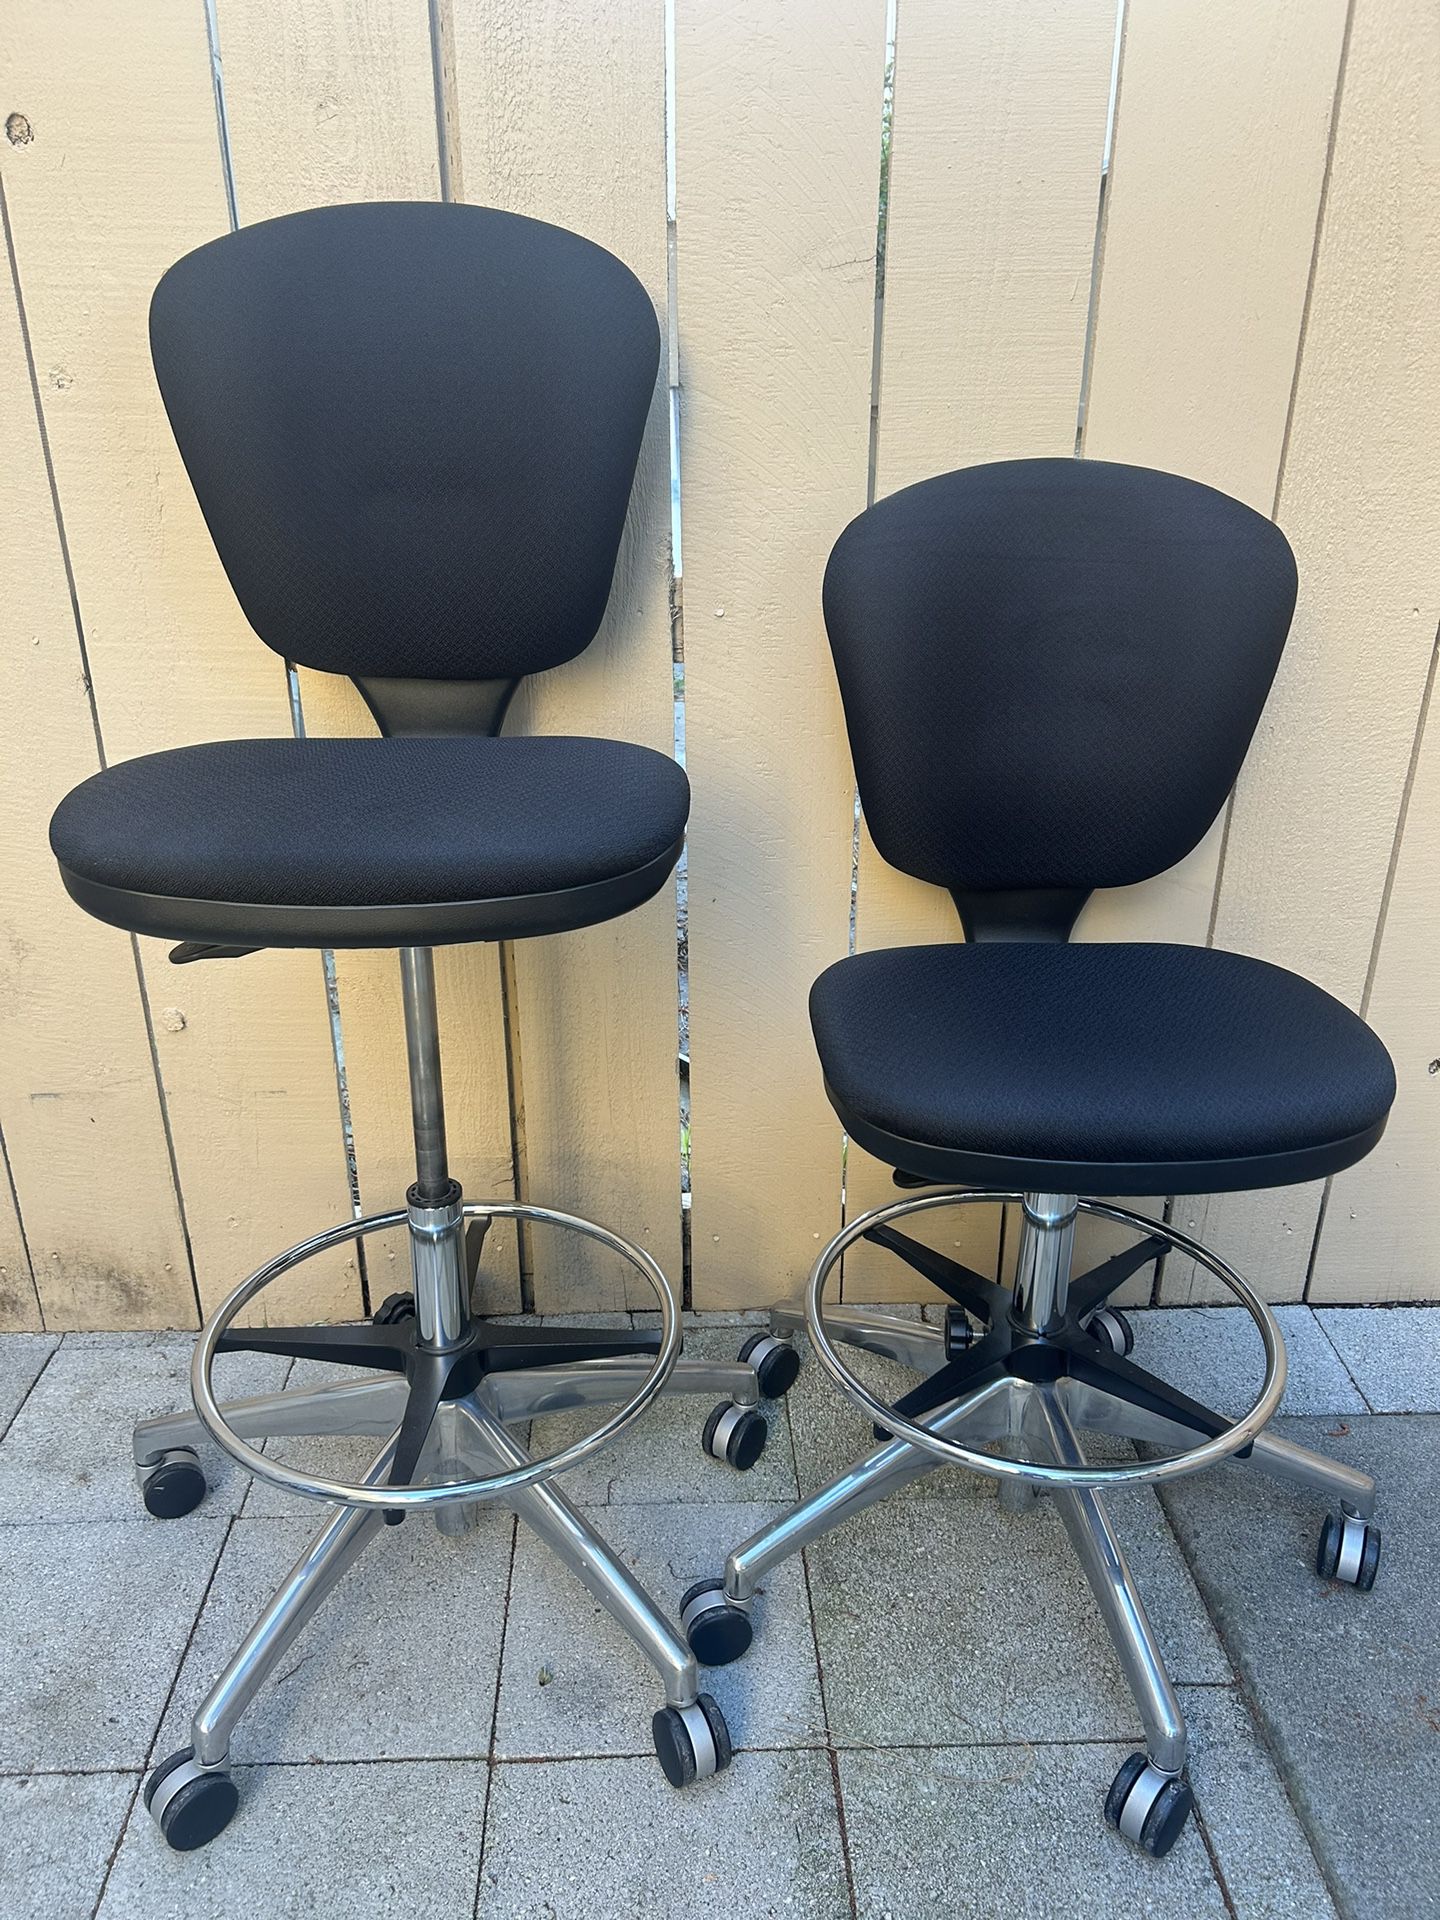 2 - Safco Extended Height Chair, Chrome/Black (Like New)